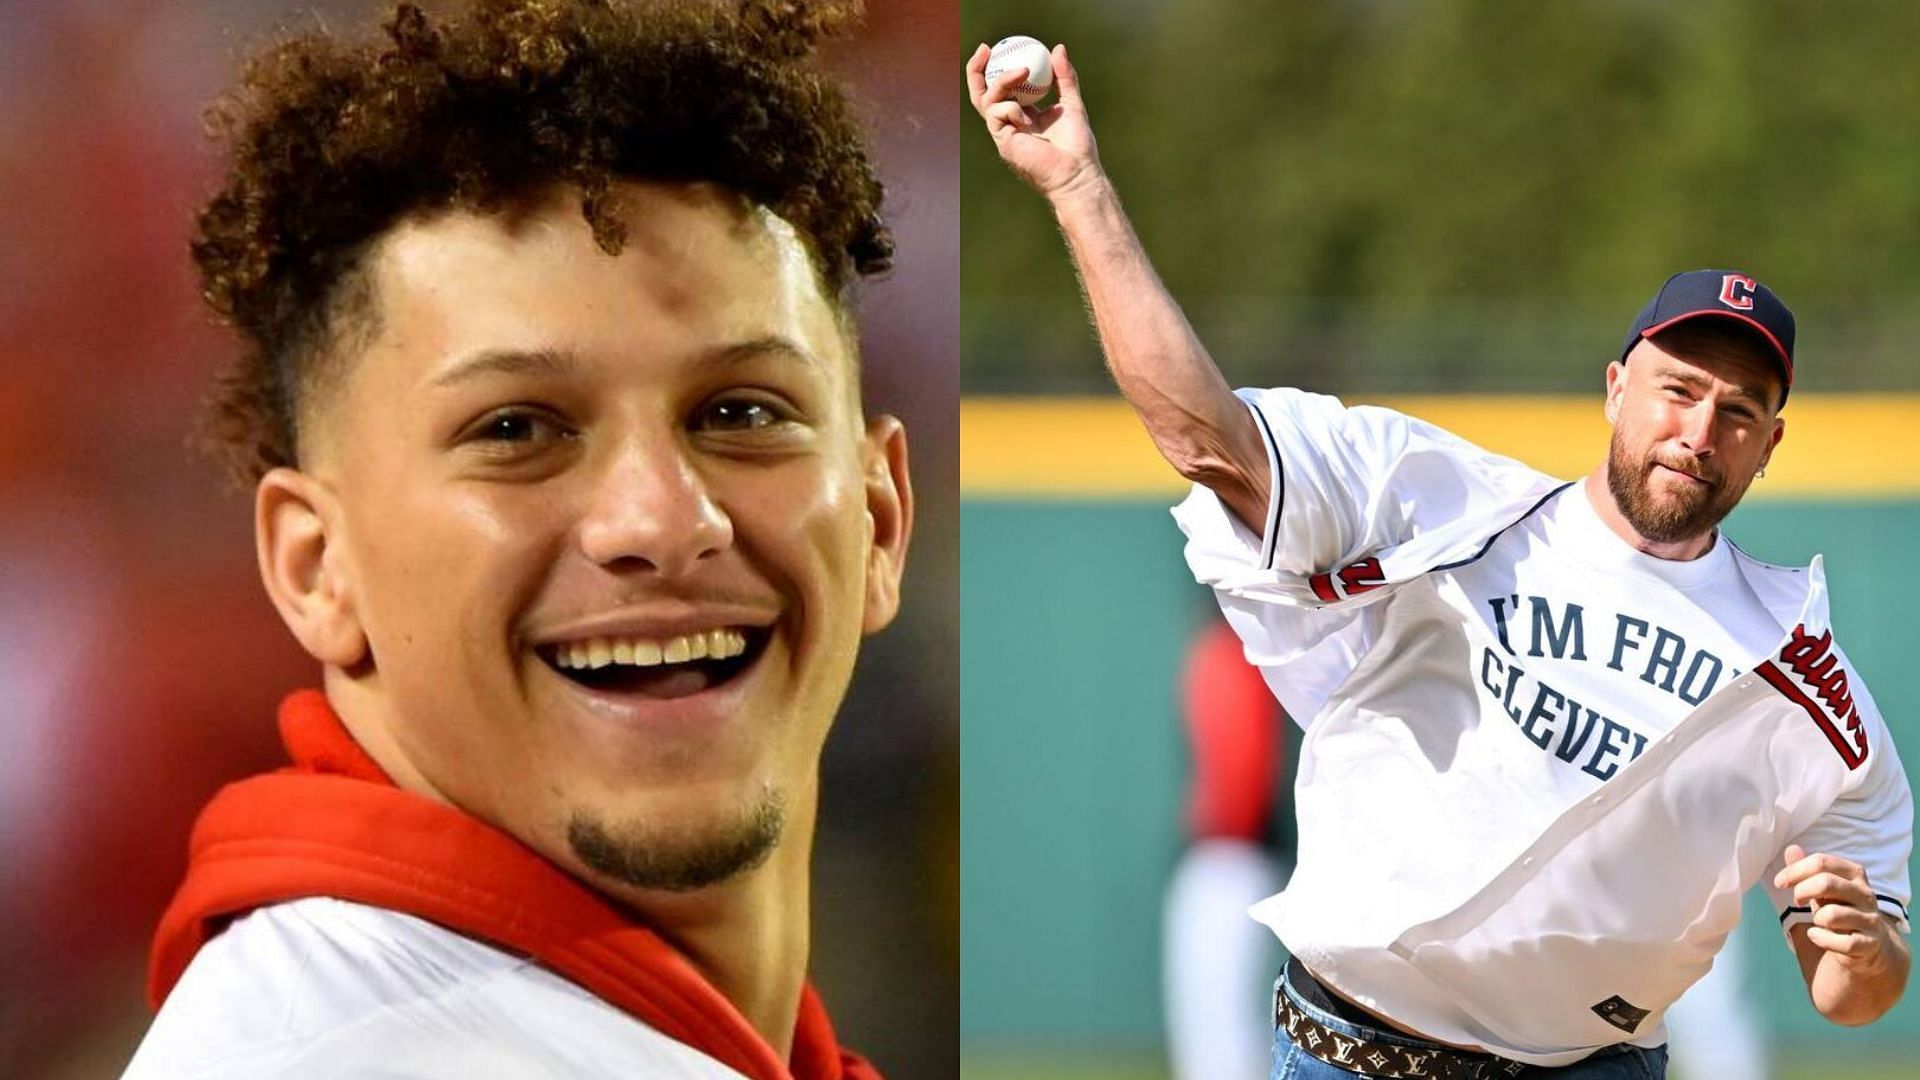 Kansas City Chiefs quarterback Patrick Mahomes congratulates All-Pro tight end Travis Kelce for throwing a perfect first pitch. (Image via: Vahe Gregorian/The Kansas City Star, Jason Miller/Getty Images)